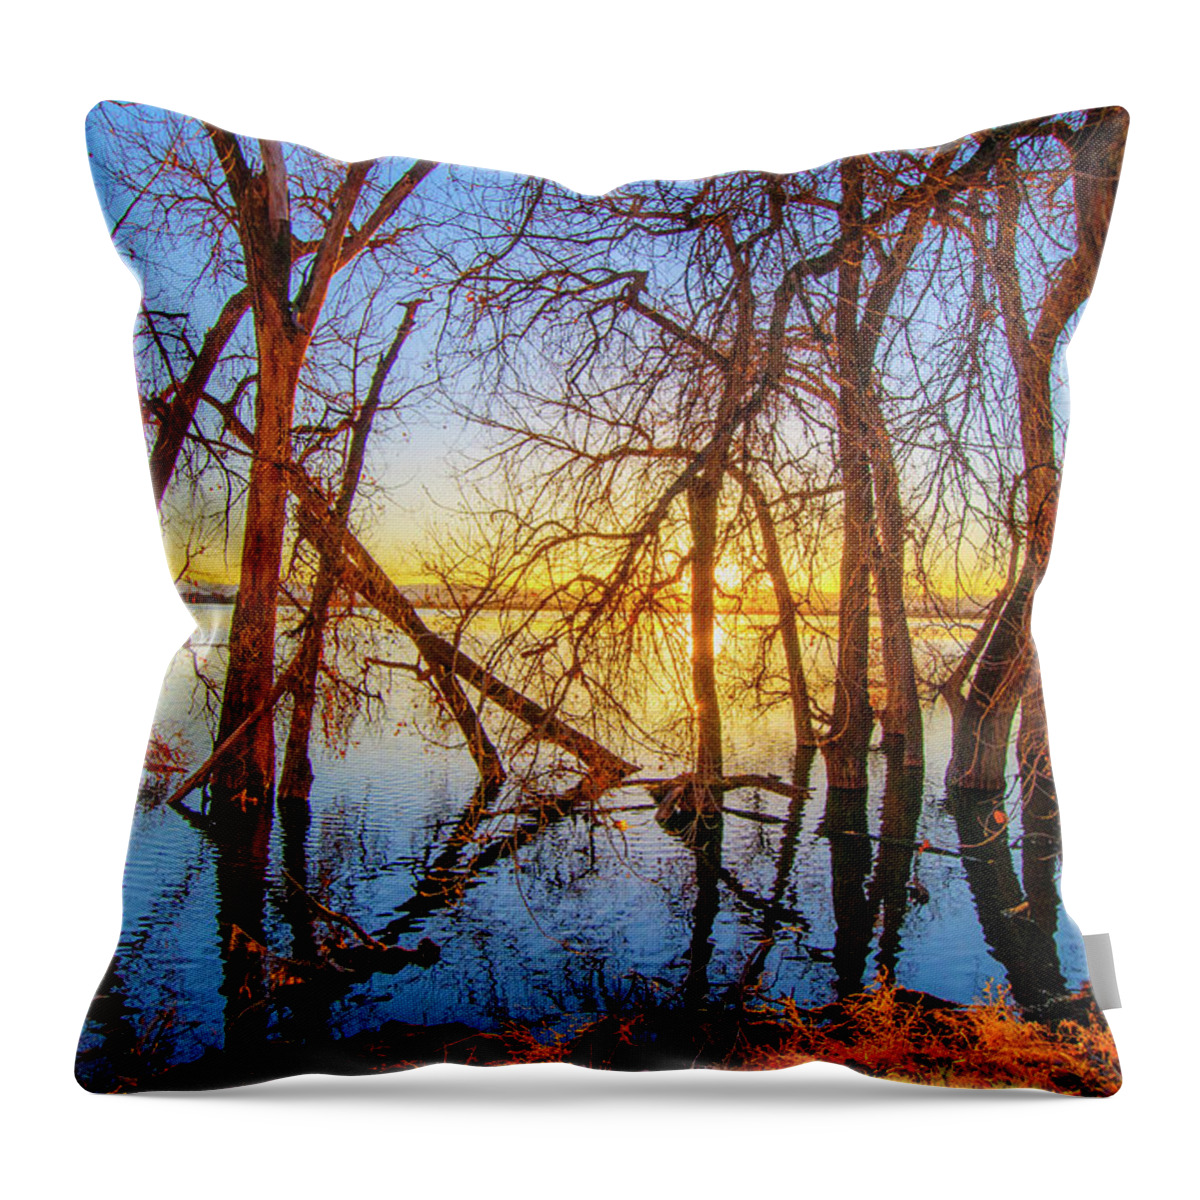 Autumn Throw Pillow featuring the photograph Twisted Trees On Lake at Sunset by Tom Potter